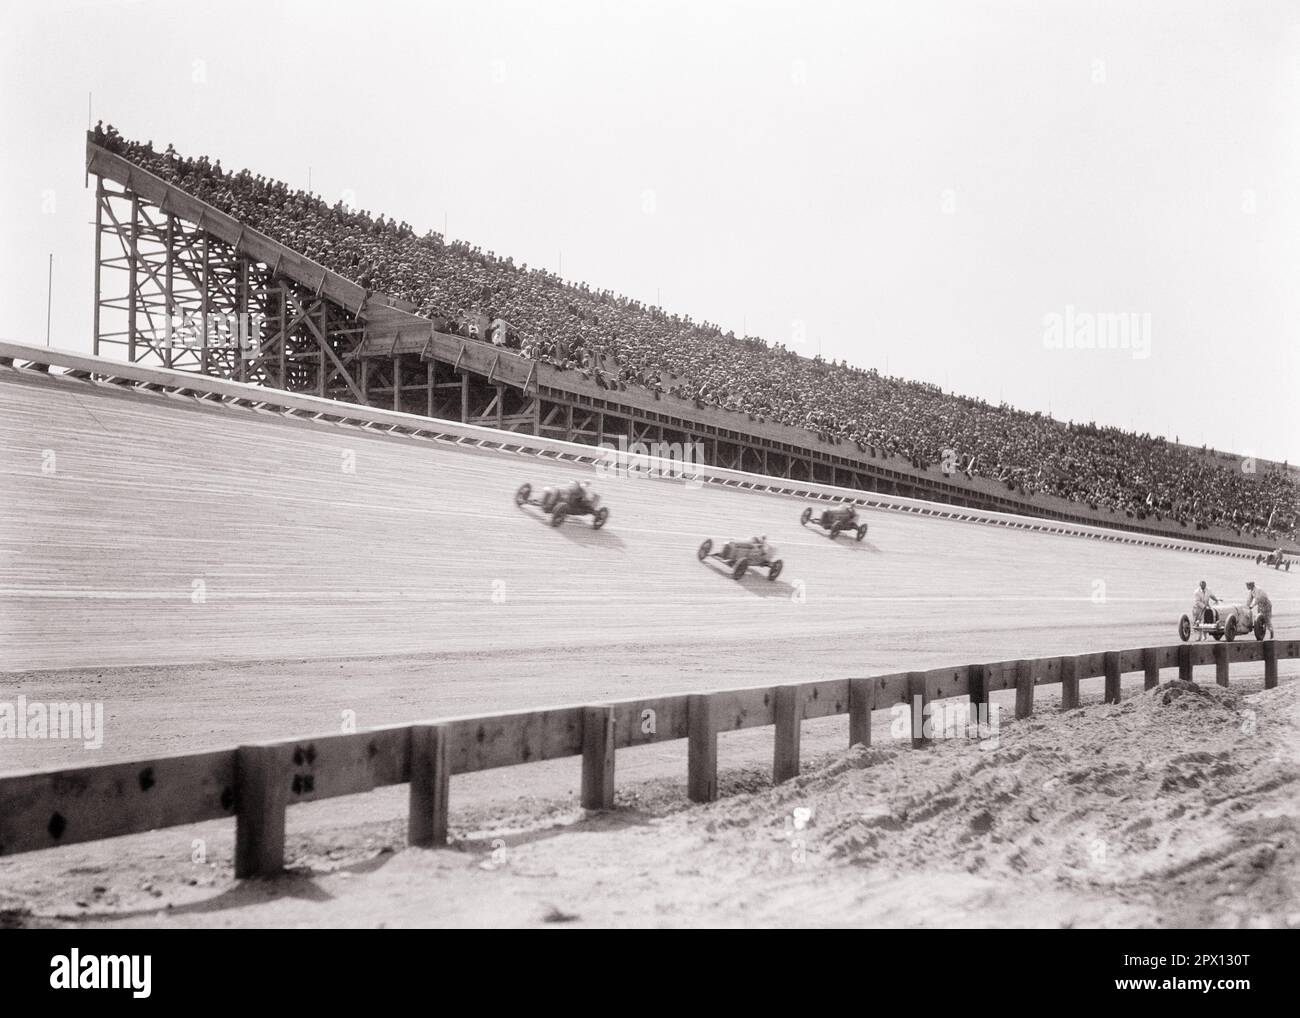 1930s THREE MIDGET RACE CARS ON SLANTED TRACK SPEEDING PAST CROWD MEN AND WOMEN WATCHING IN LARGE SLOPED WOODEN GRANDSTAND - m915 HAR001 HARS FEMALES ASSEMBLY RURAL COPY SPACE LADIES MASS PERSONS AUTOMOBILE MALES ATHLETIC ENTERTAINMENT TRANSPORTATION SPECTATORS B&W GATHERING WIDE ANGLE ADVENTURE DANGEROUS AND AUTOS EXCITEMENT RECREATION INNOVATION IN ON ATTRACTION OCCUPATIONS PAST SPEEDING PROFESSIONAL SPORTS CONCEPTUAL GRANDSTANDS AUTOMOBILES VEHICLES GRANDSTAND PANORAMIC RACEWAY SLOPED MIDGET THRONG ATTENDANCE BLACK AND WHITE HAR001 OLD FASHIONED Stock Photo